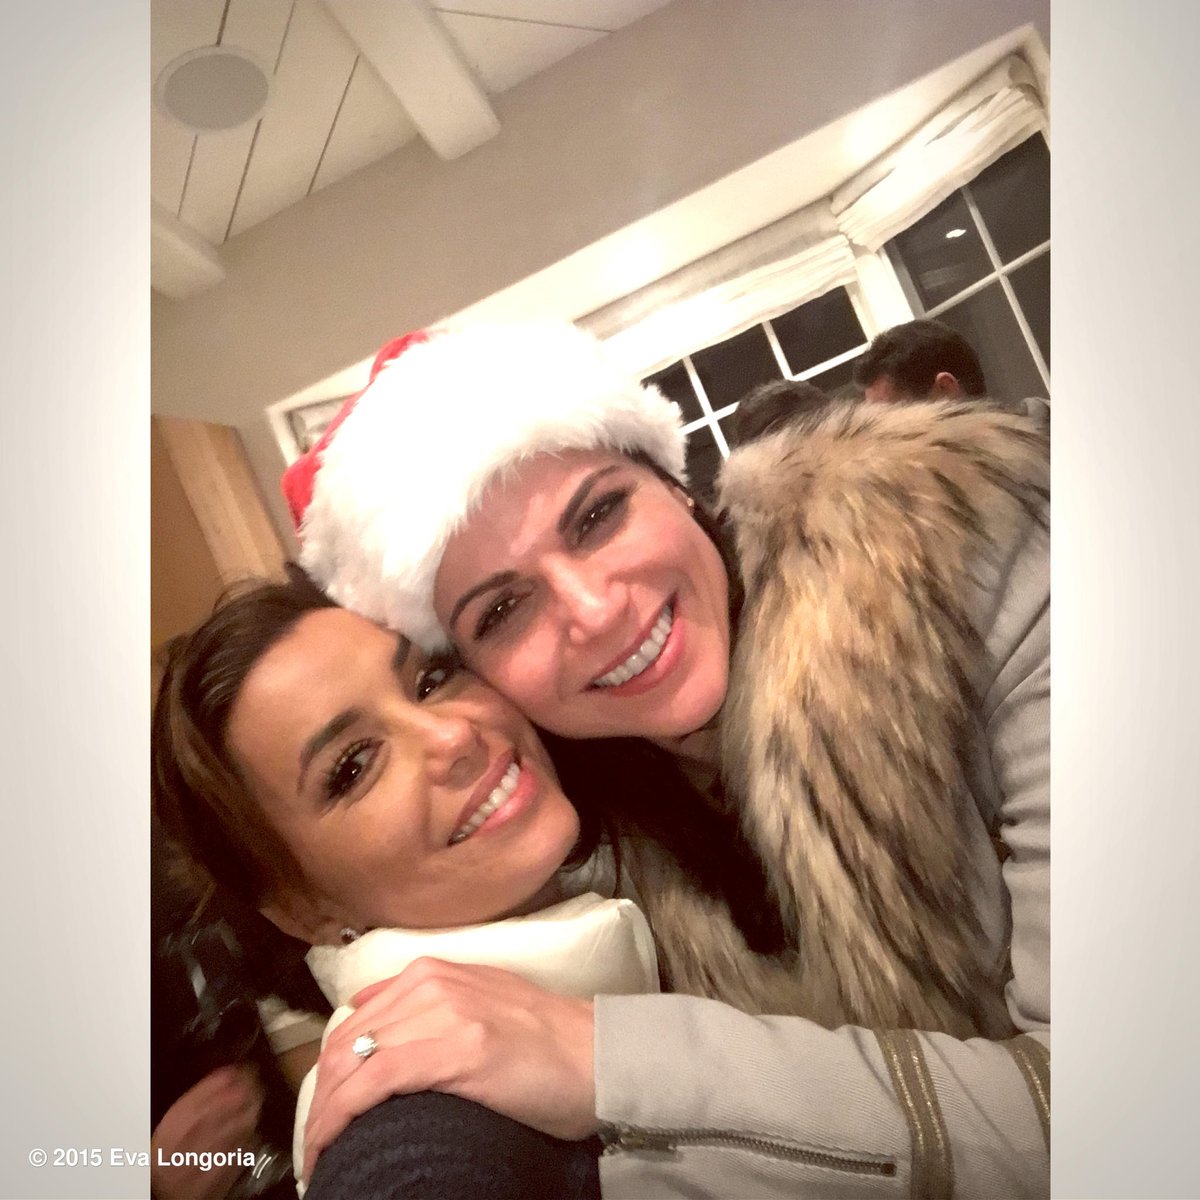 Me and my girl @LanaParrilla in the Christmas spirit! #MerryChristmas https://t.co/SsCMSpmf5H